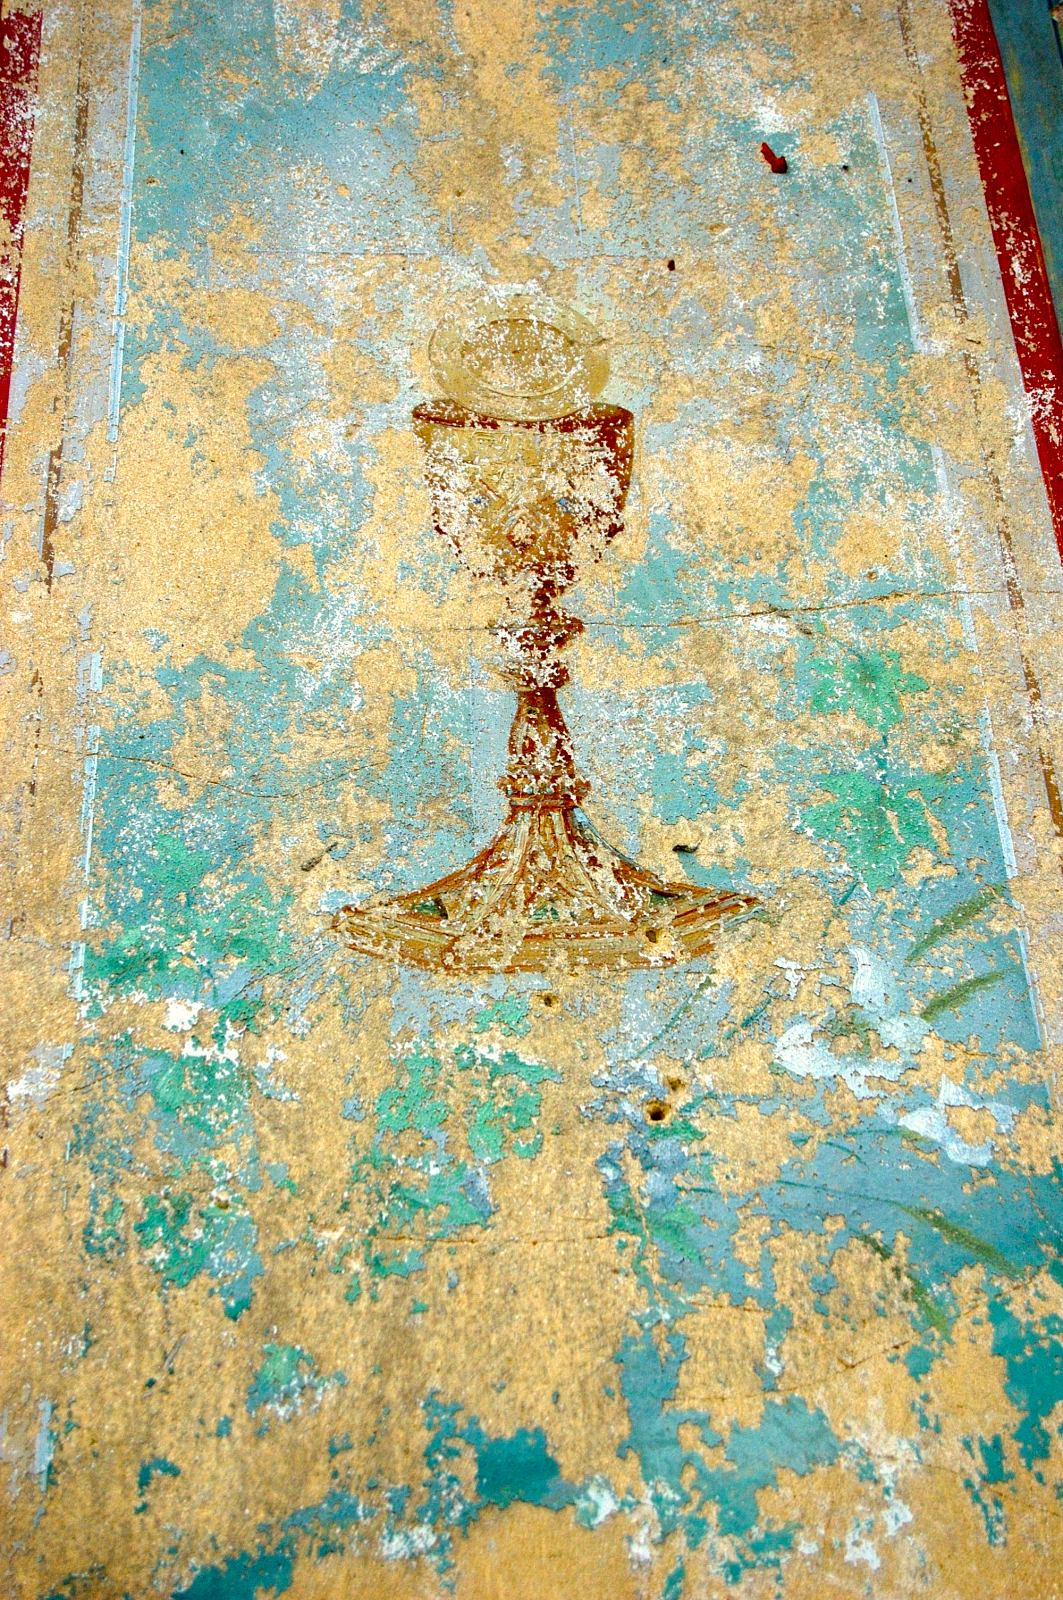 Remains of a chalice painted by Italian artists. St. Mary's Catholic Church Kamenka, Russia. Source: Steve Schreiber (2006).